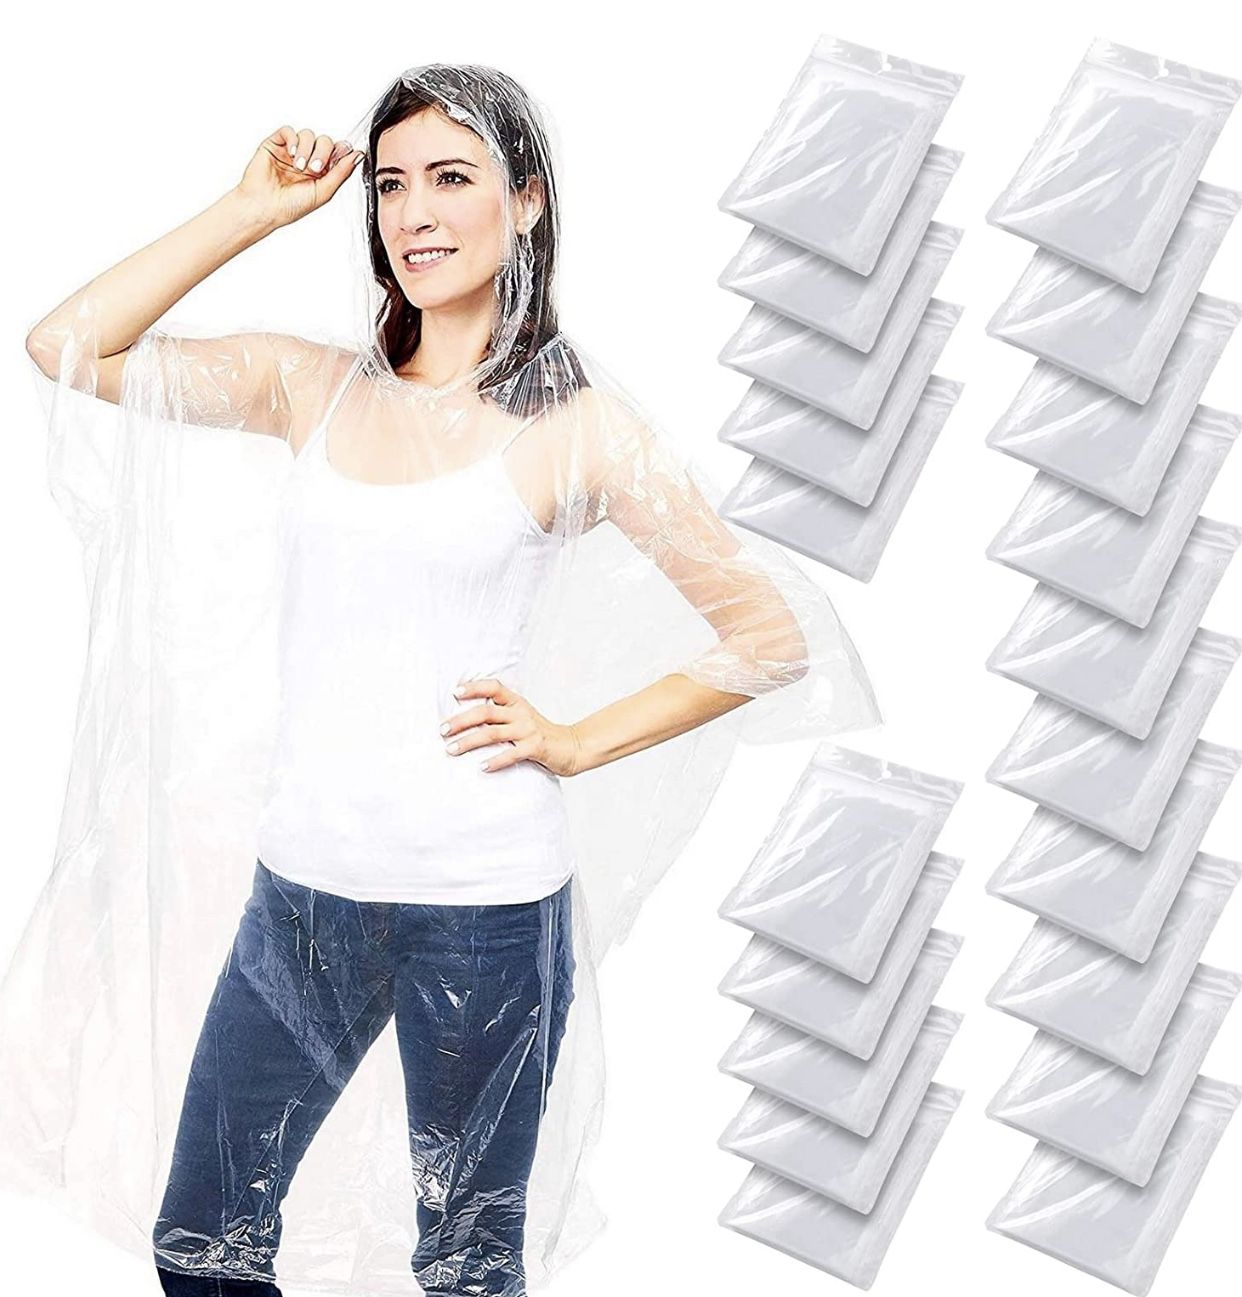 Juvale 20 Pack Disposable Rain Ponchos for Adults, with Hood, Clear NEW